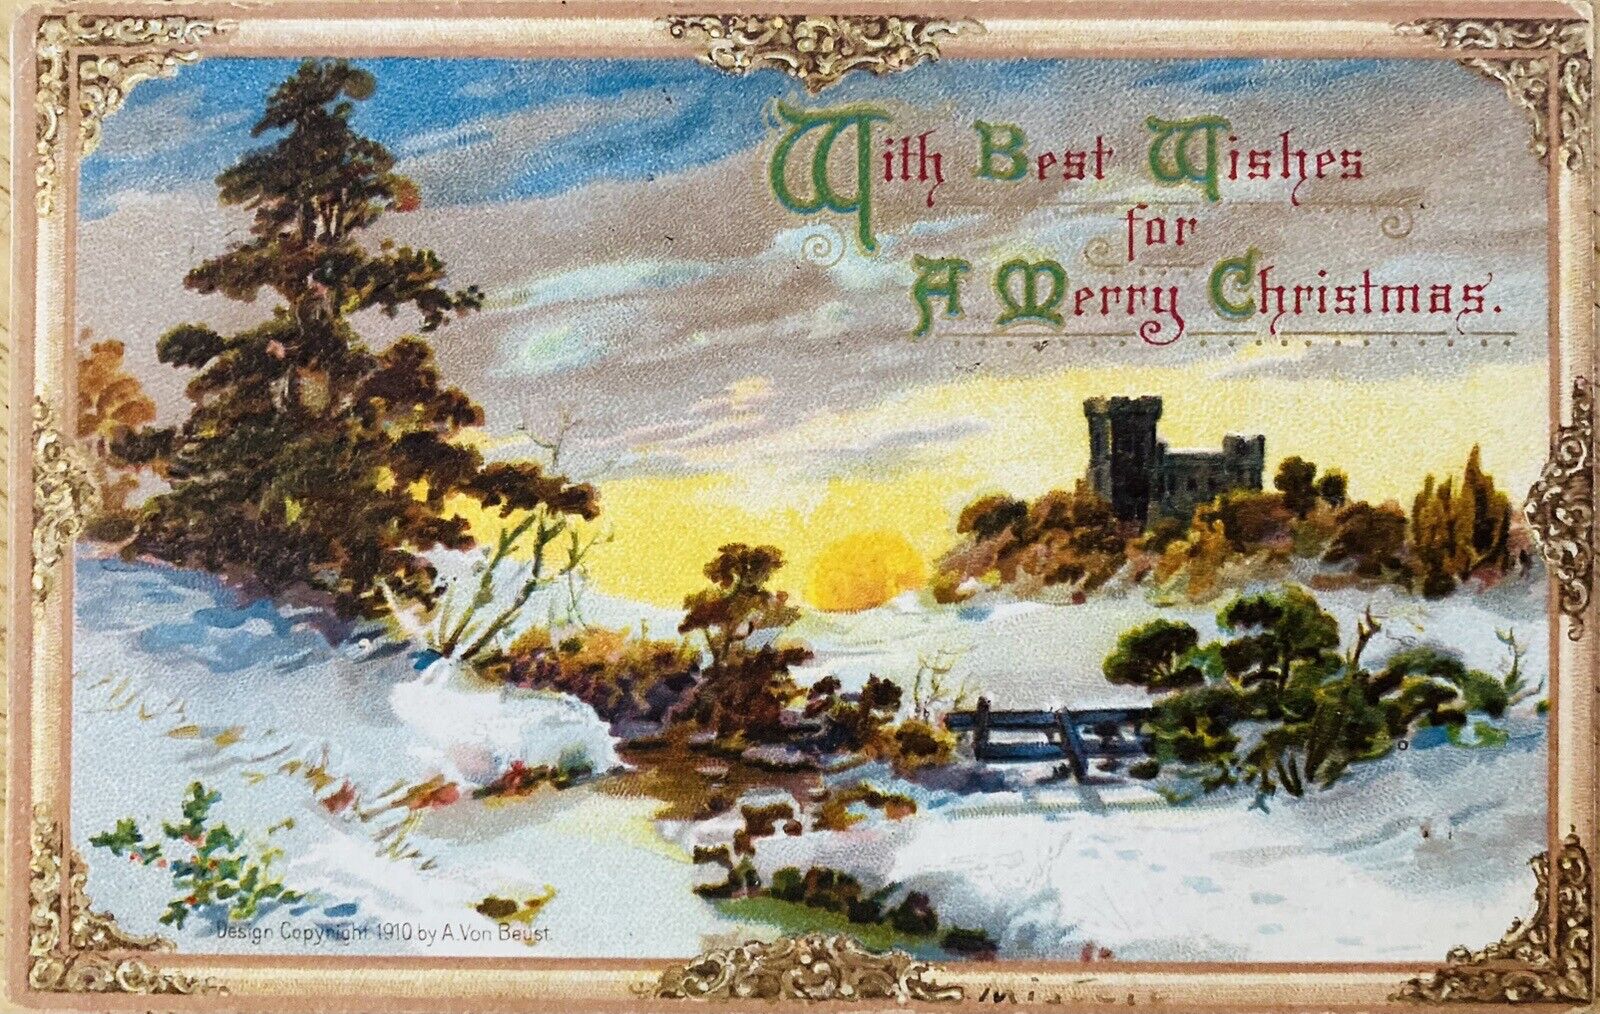 CHRISTMAS PC. C.1911 (A63)~”WITH BEST WISHES FOR A MERRY CHRISTMAS”